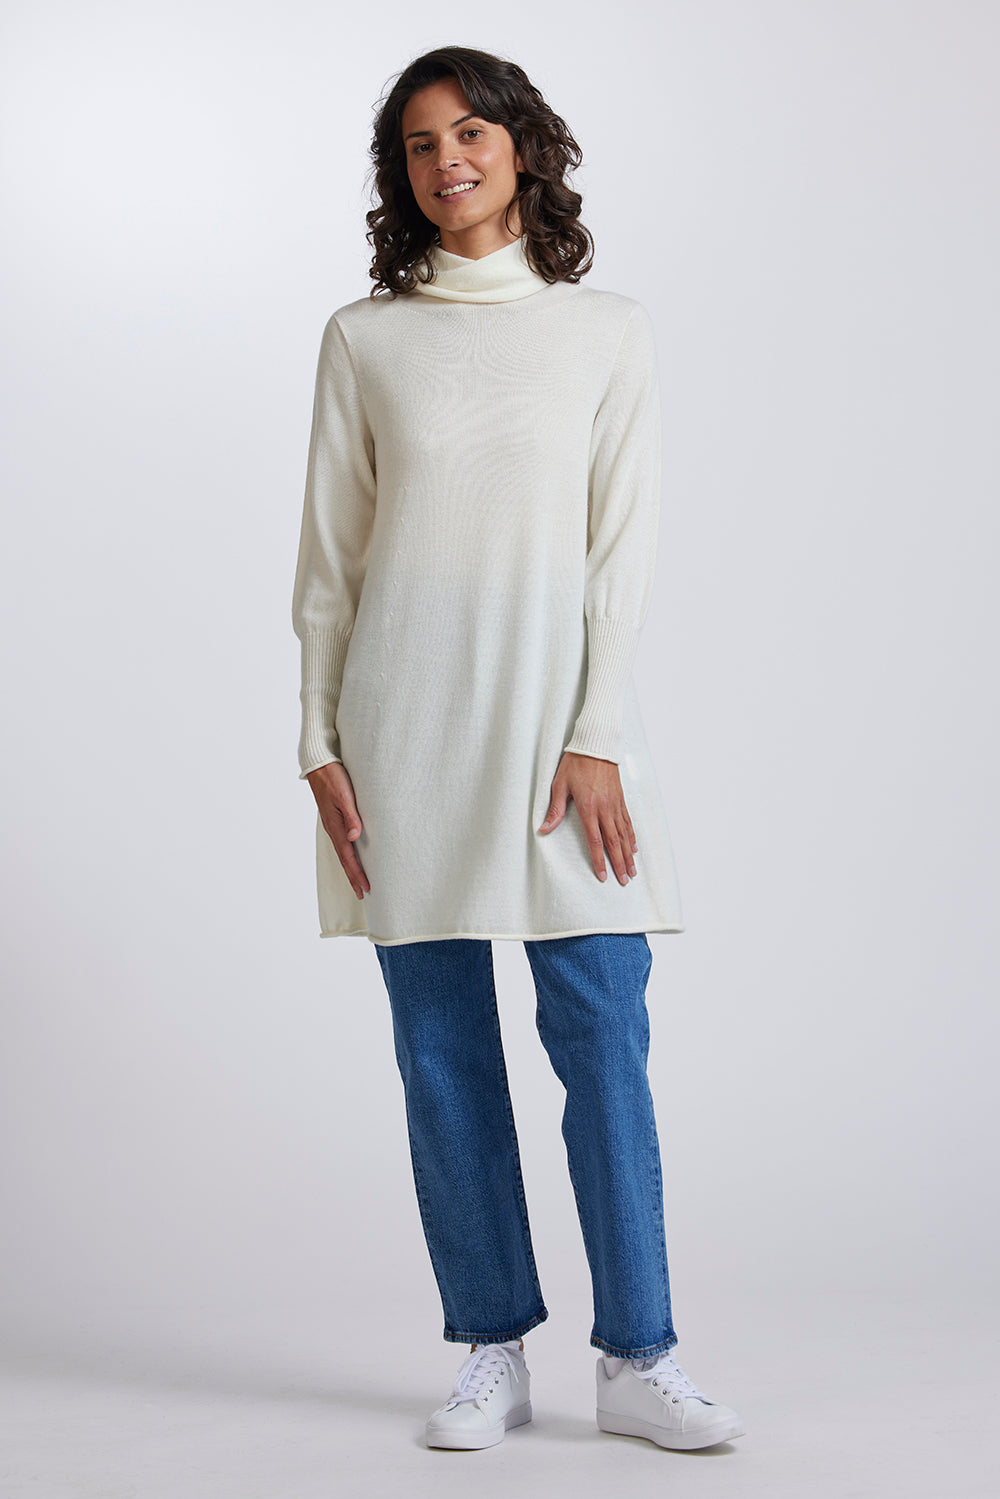 Flared Tunic in Natural by Royal Merino